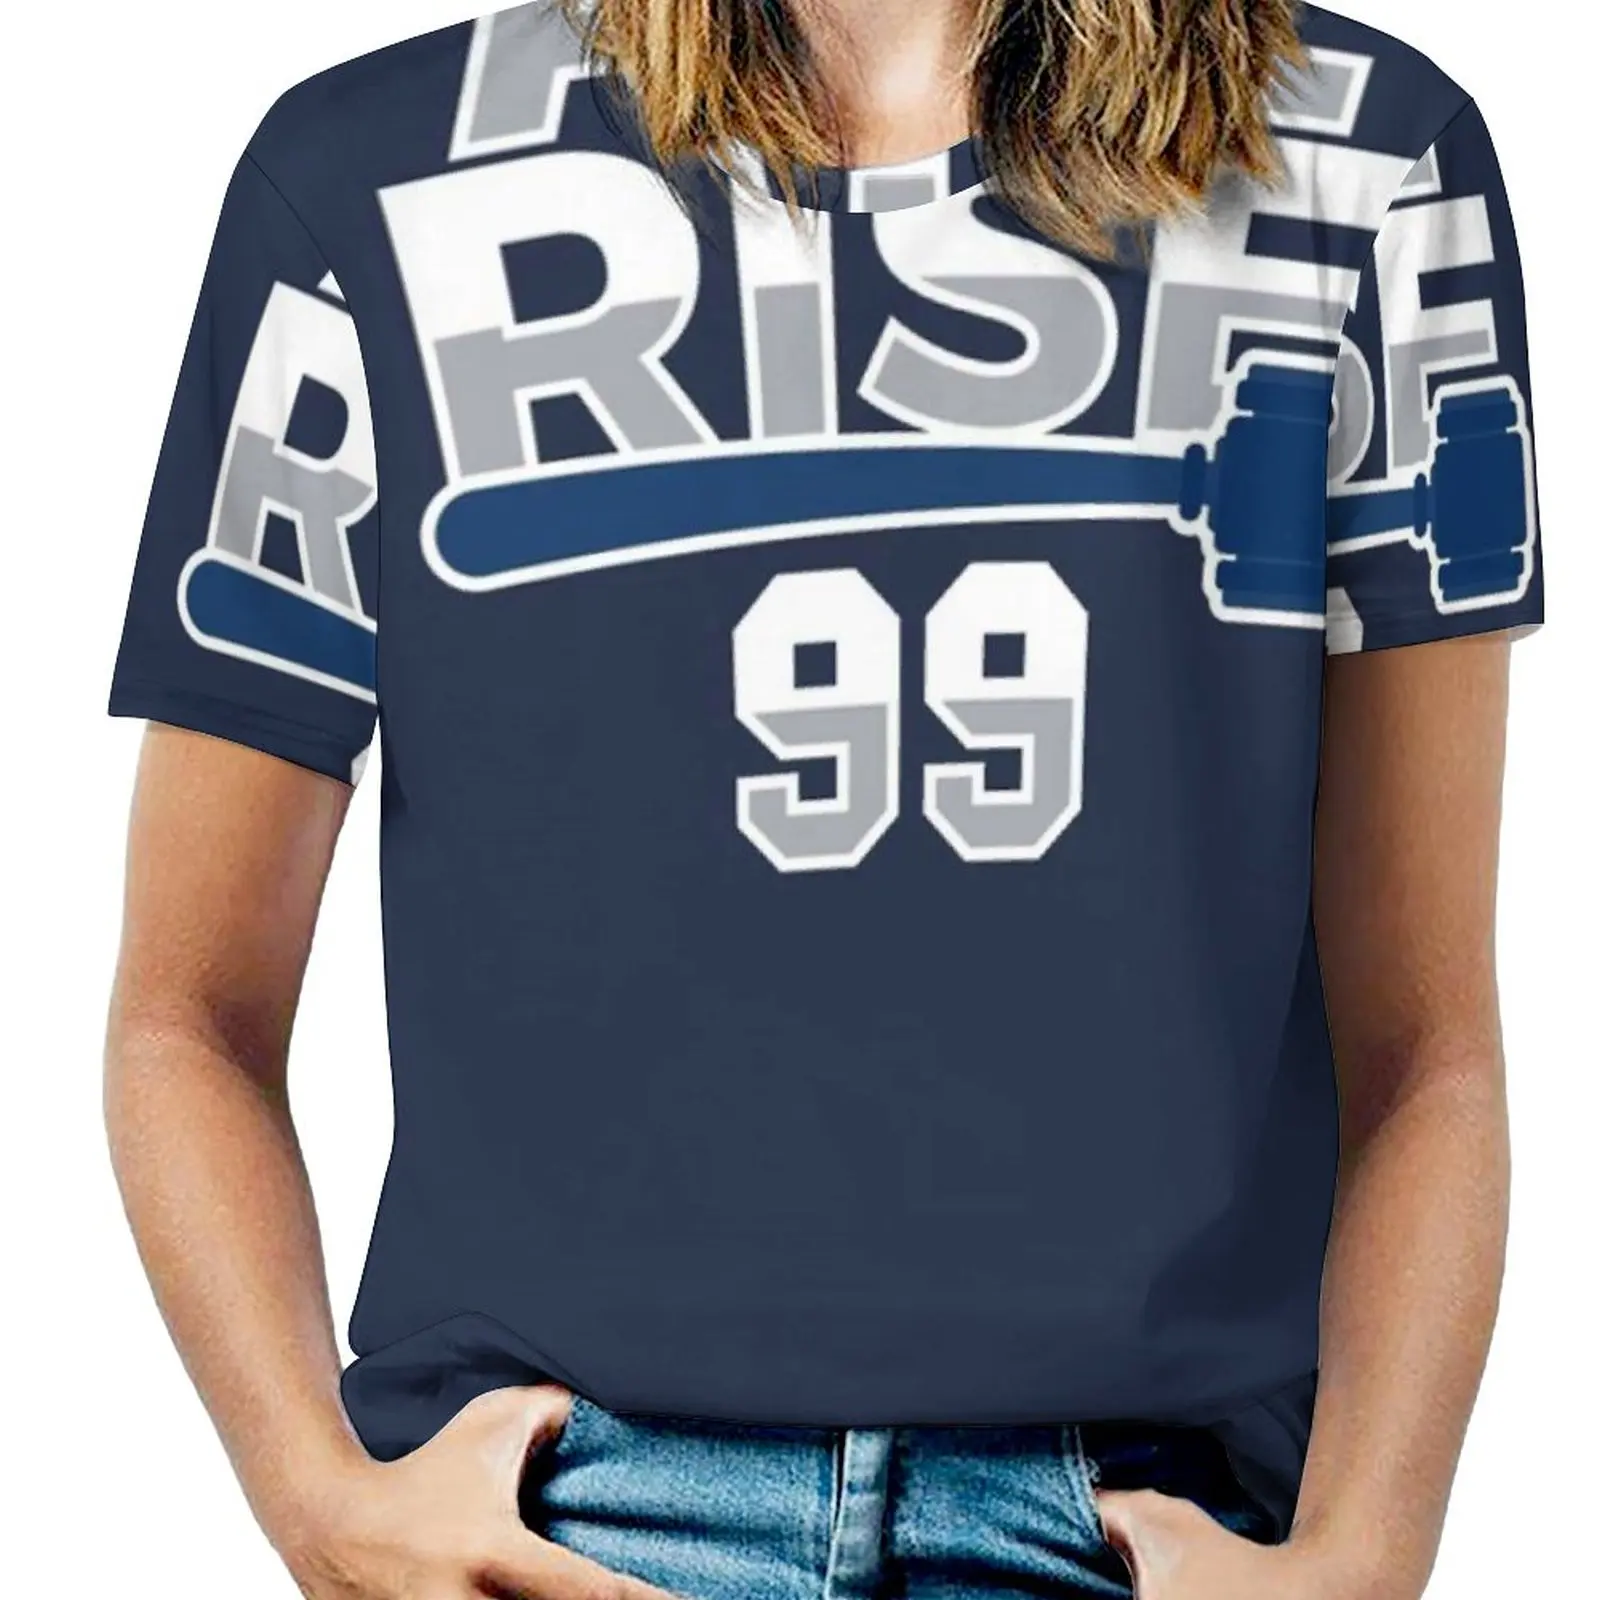 All Rise 99-All Rise For The Judge Ny Yankee Baseball Women Zipper Sexy  Printed Vintage T Shirts Tops Full Print T-Shirt Aaron